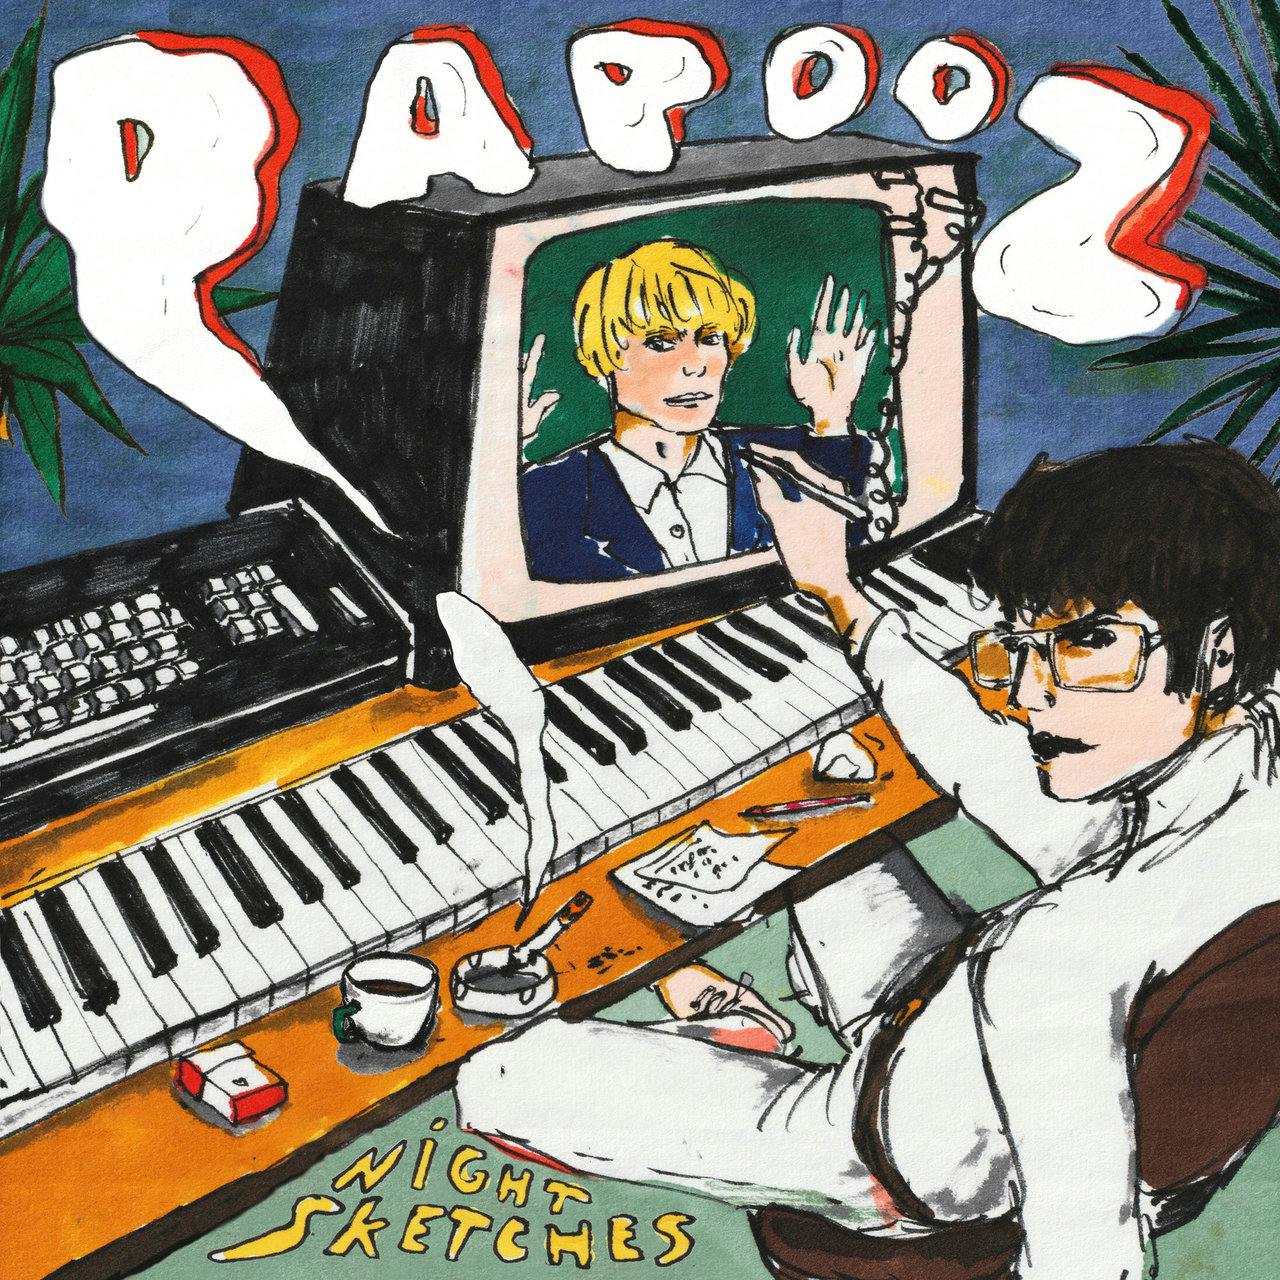 I discovered Papooz during the pandemic in April of 2020. I immediately was enamored by their music and artistic tastes. This record is great because it has so many little moments through and while the songs change up from disco to more soft pop, the vibe never leaves your ears. It's a nice sounding record with great vocal production and with great lyrics as well. Really looking forward to the next Papooz record.